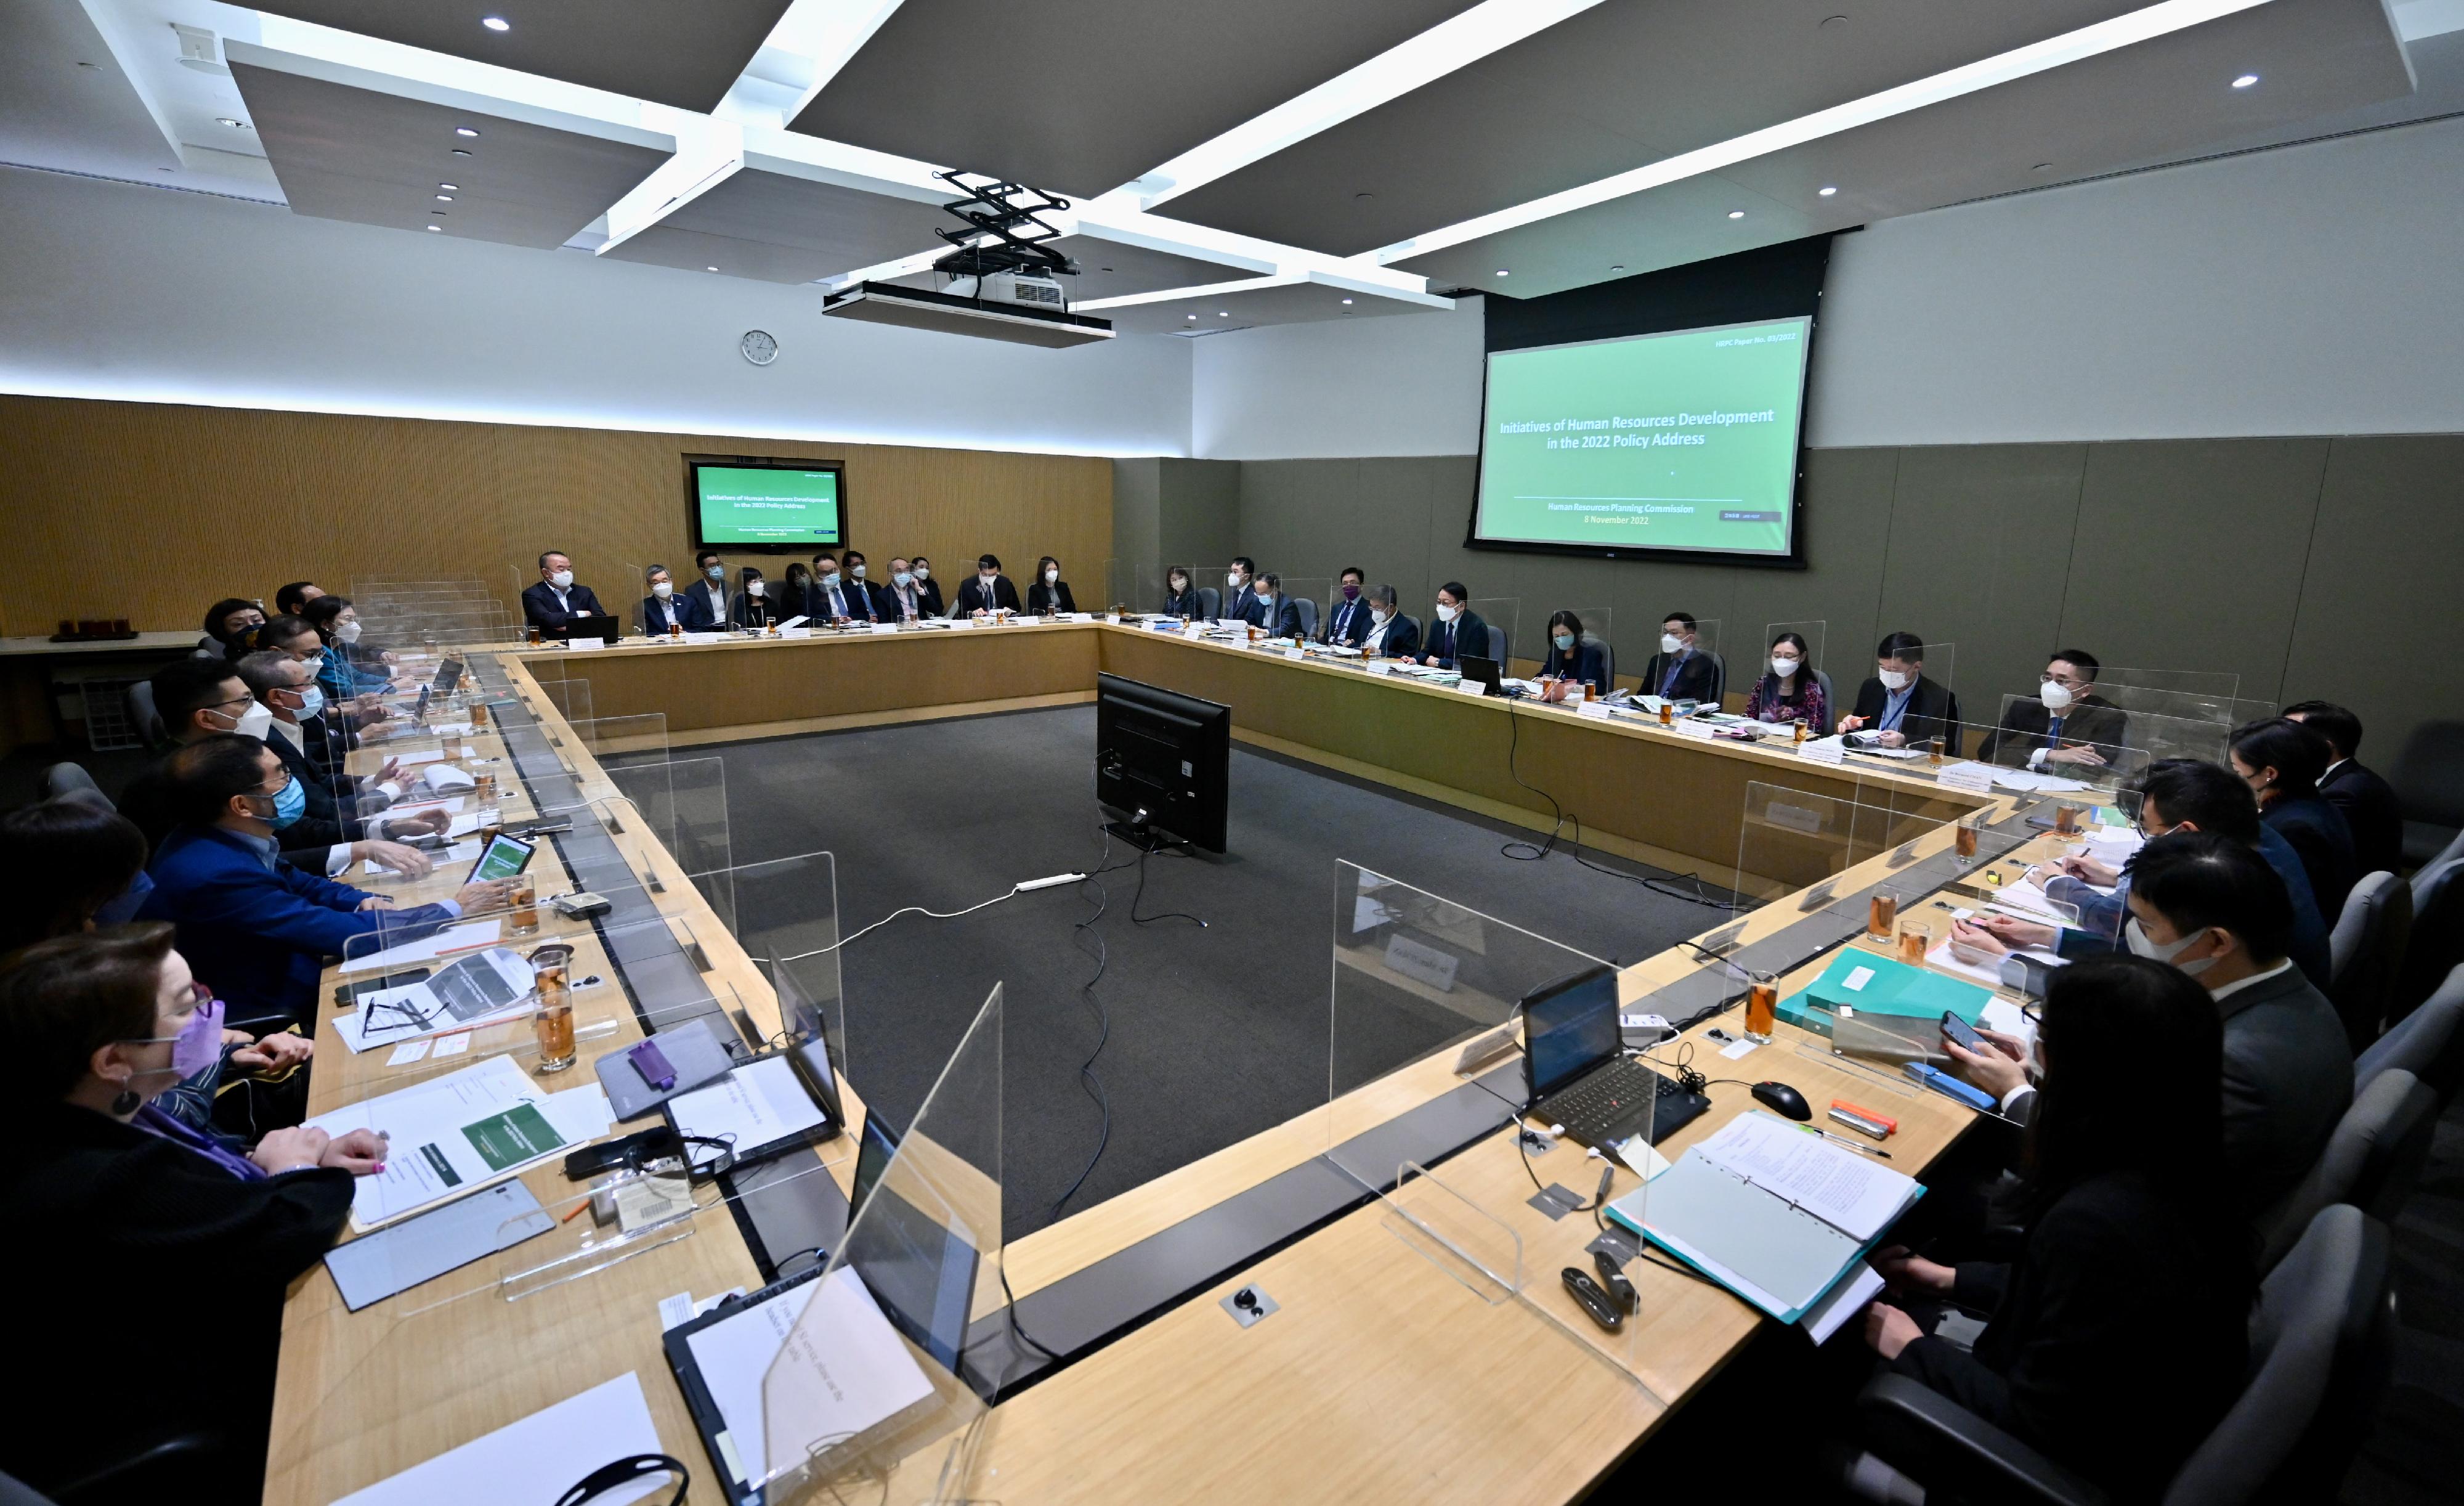 The Chief Secretary for Administration, Mr Chan Kwok-ki, today (November 8) chaired a meeting of the Human Resources Planning Commission for the first time. He briefed members on the initiatives related to human resources development in "The Chief Executive's 2022 Policy Address" and listened to their views.